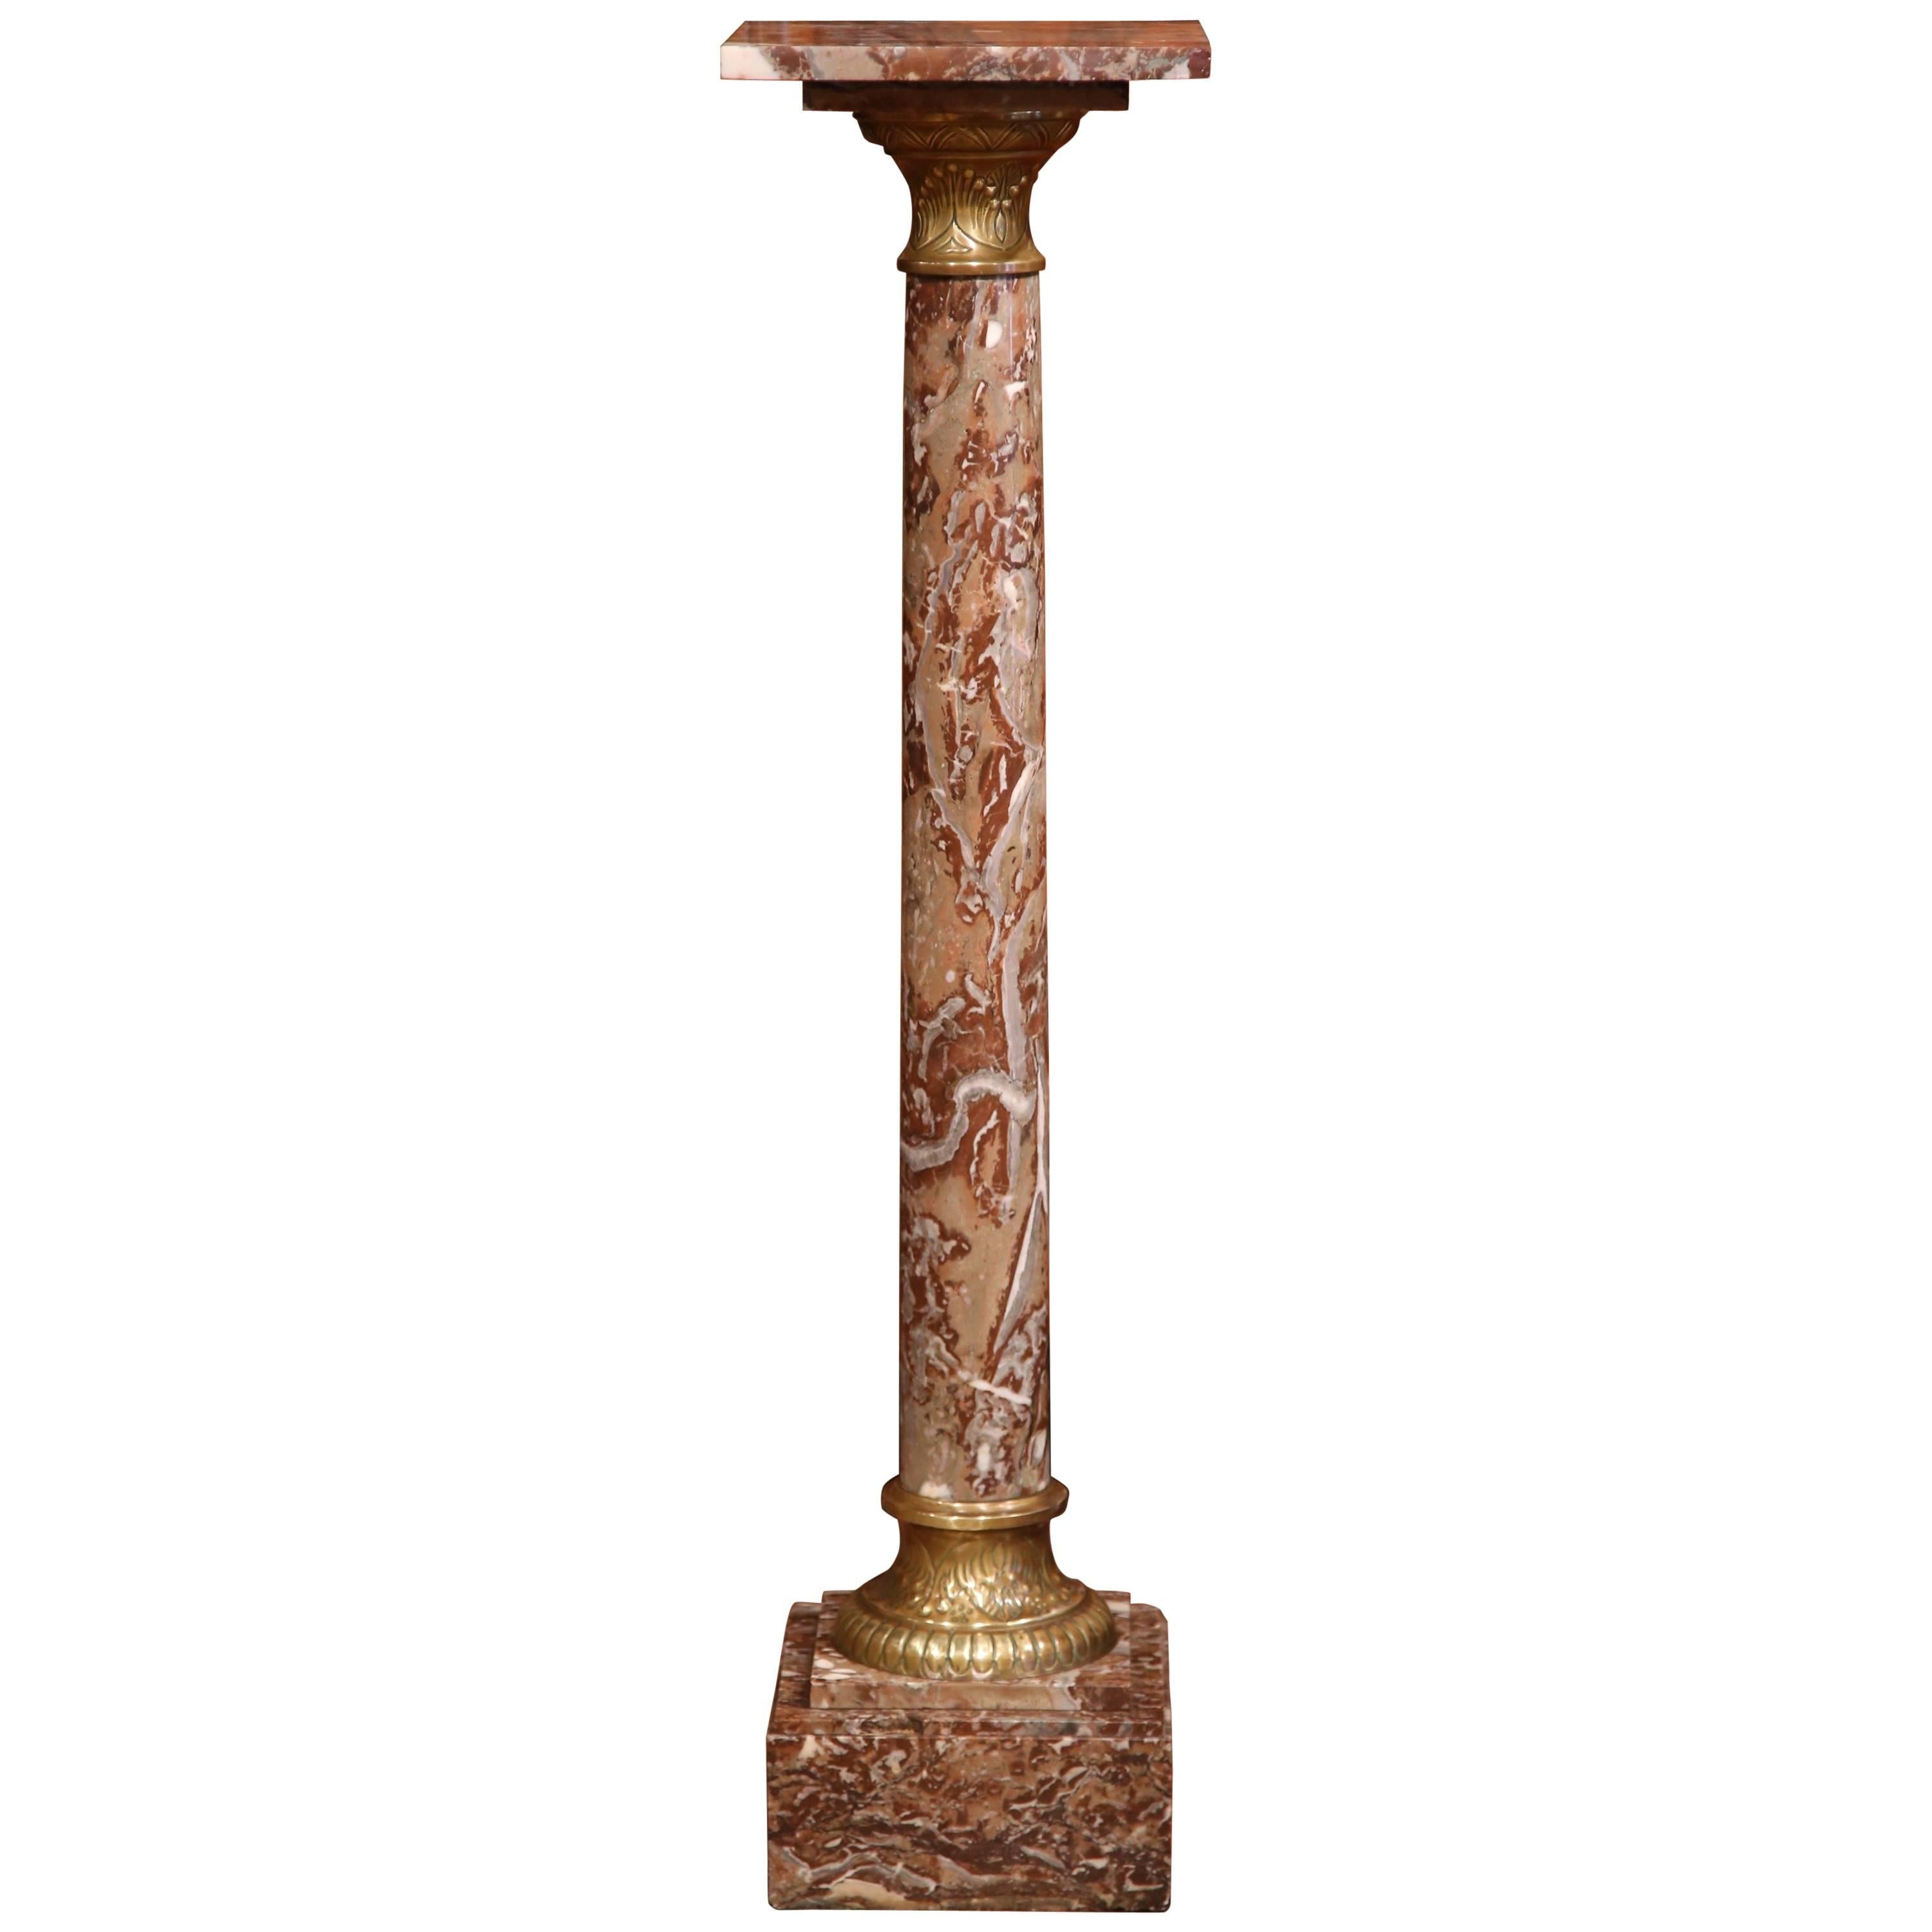 19th Century French Red Marble and Brass Pedestal with Swivel Top